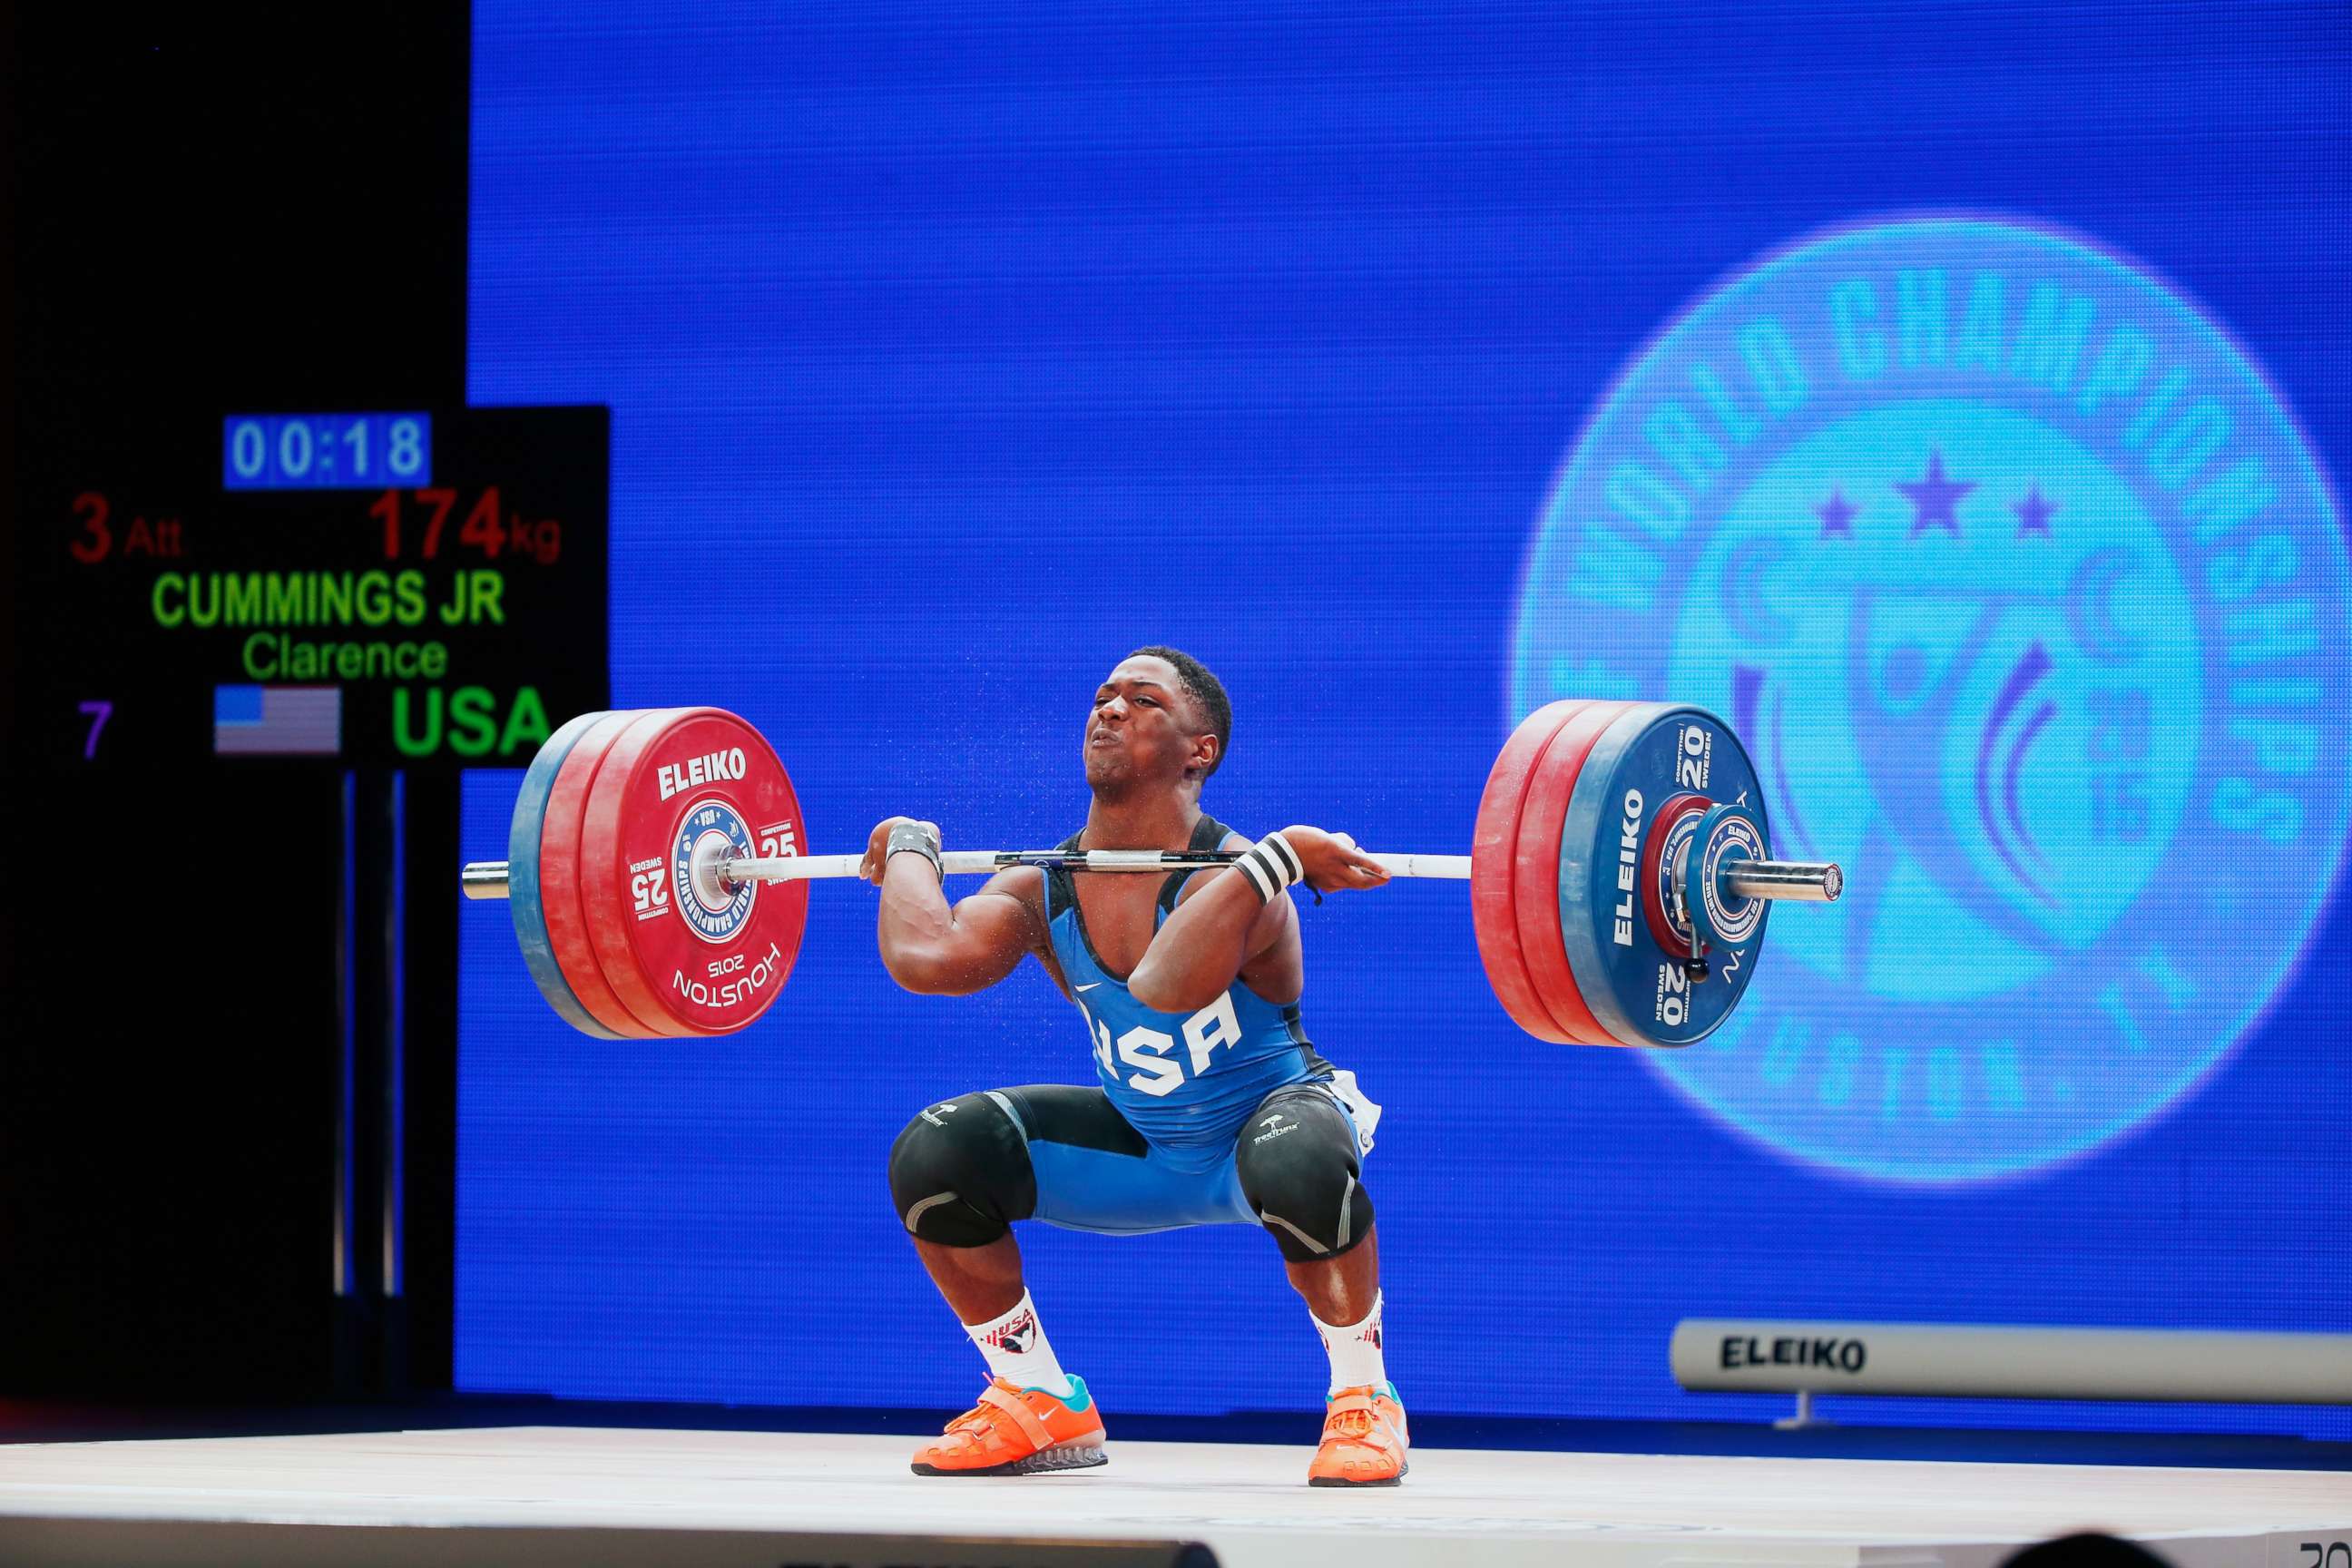 PHOTO: Clarence Cummings Jr. of the United States competes in the men's 69kg weight class during the 2015 International Weightlifting Federation World Championships at the George R. Brown Convention Center on November 22, 2015 in Houston, Texas.